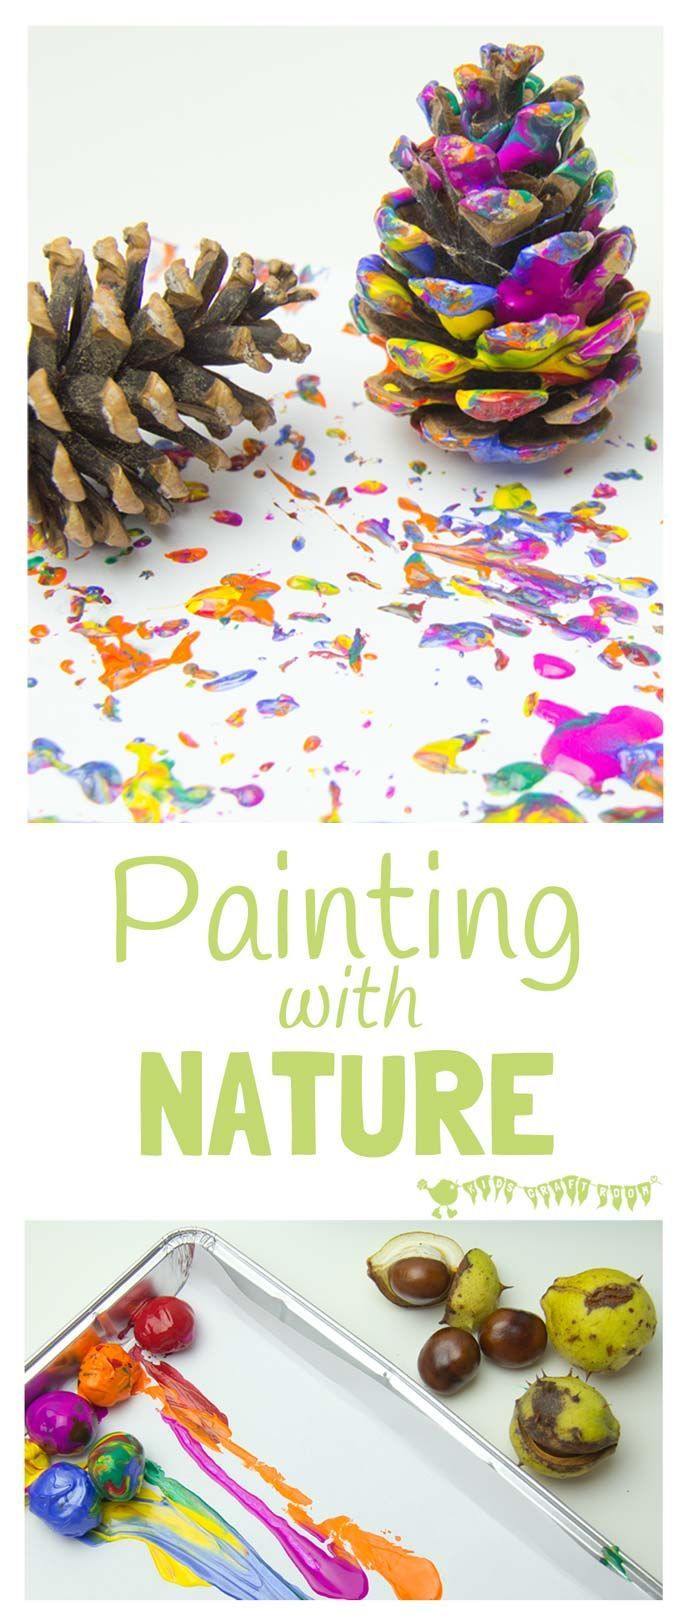 PAINTING WITH NATURE -   22 nature crafts
 ideas